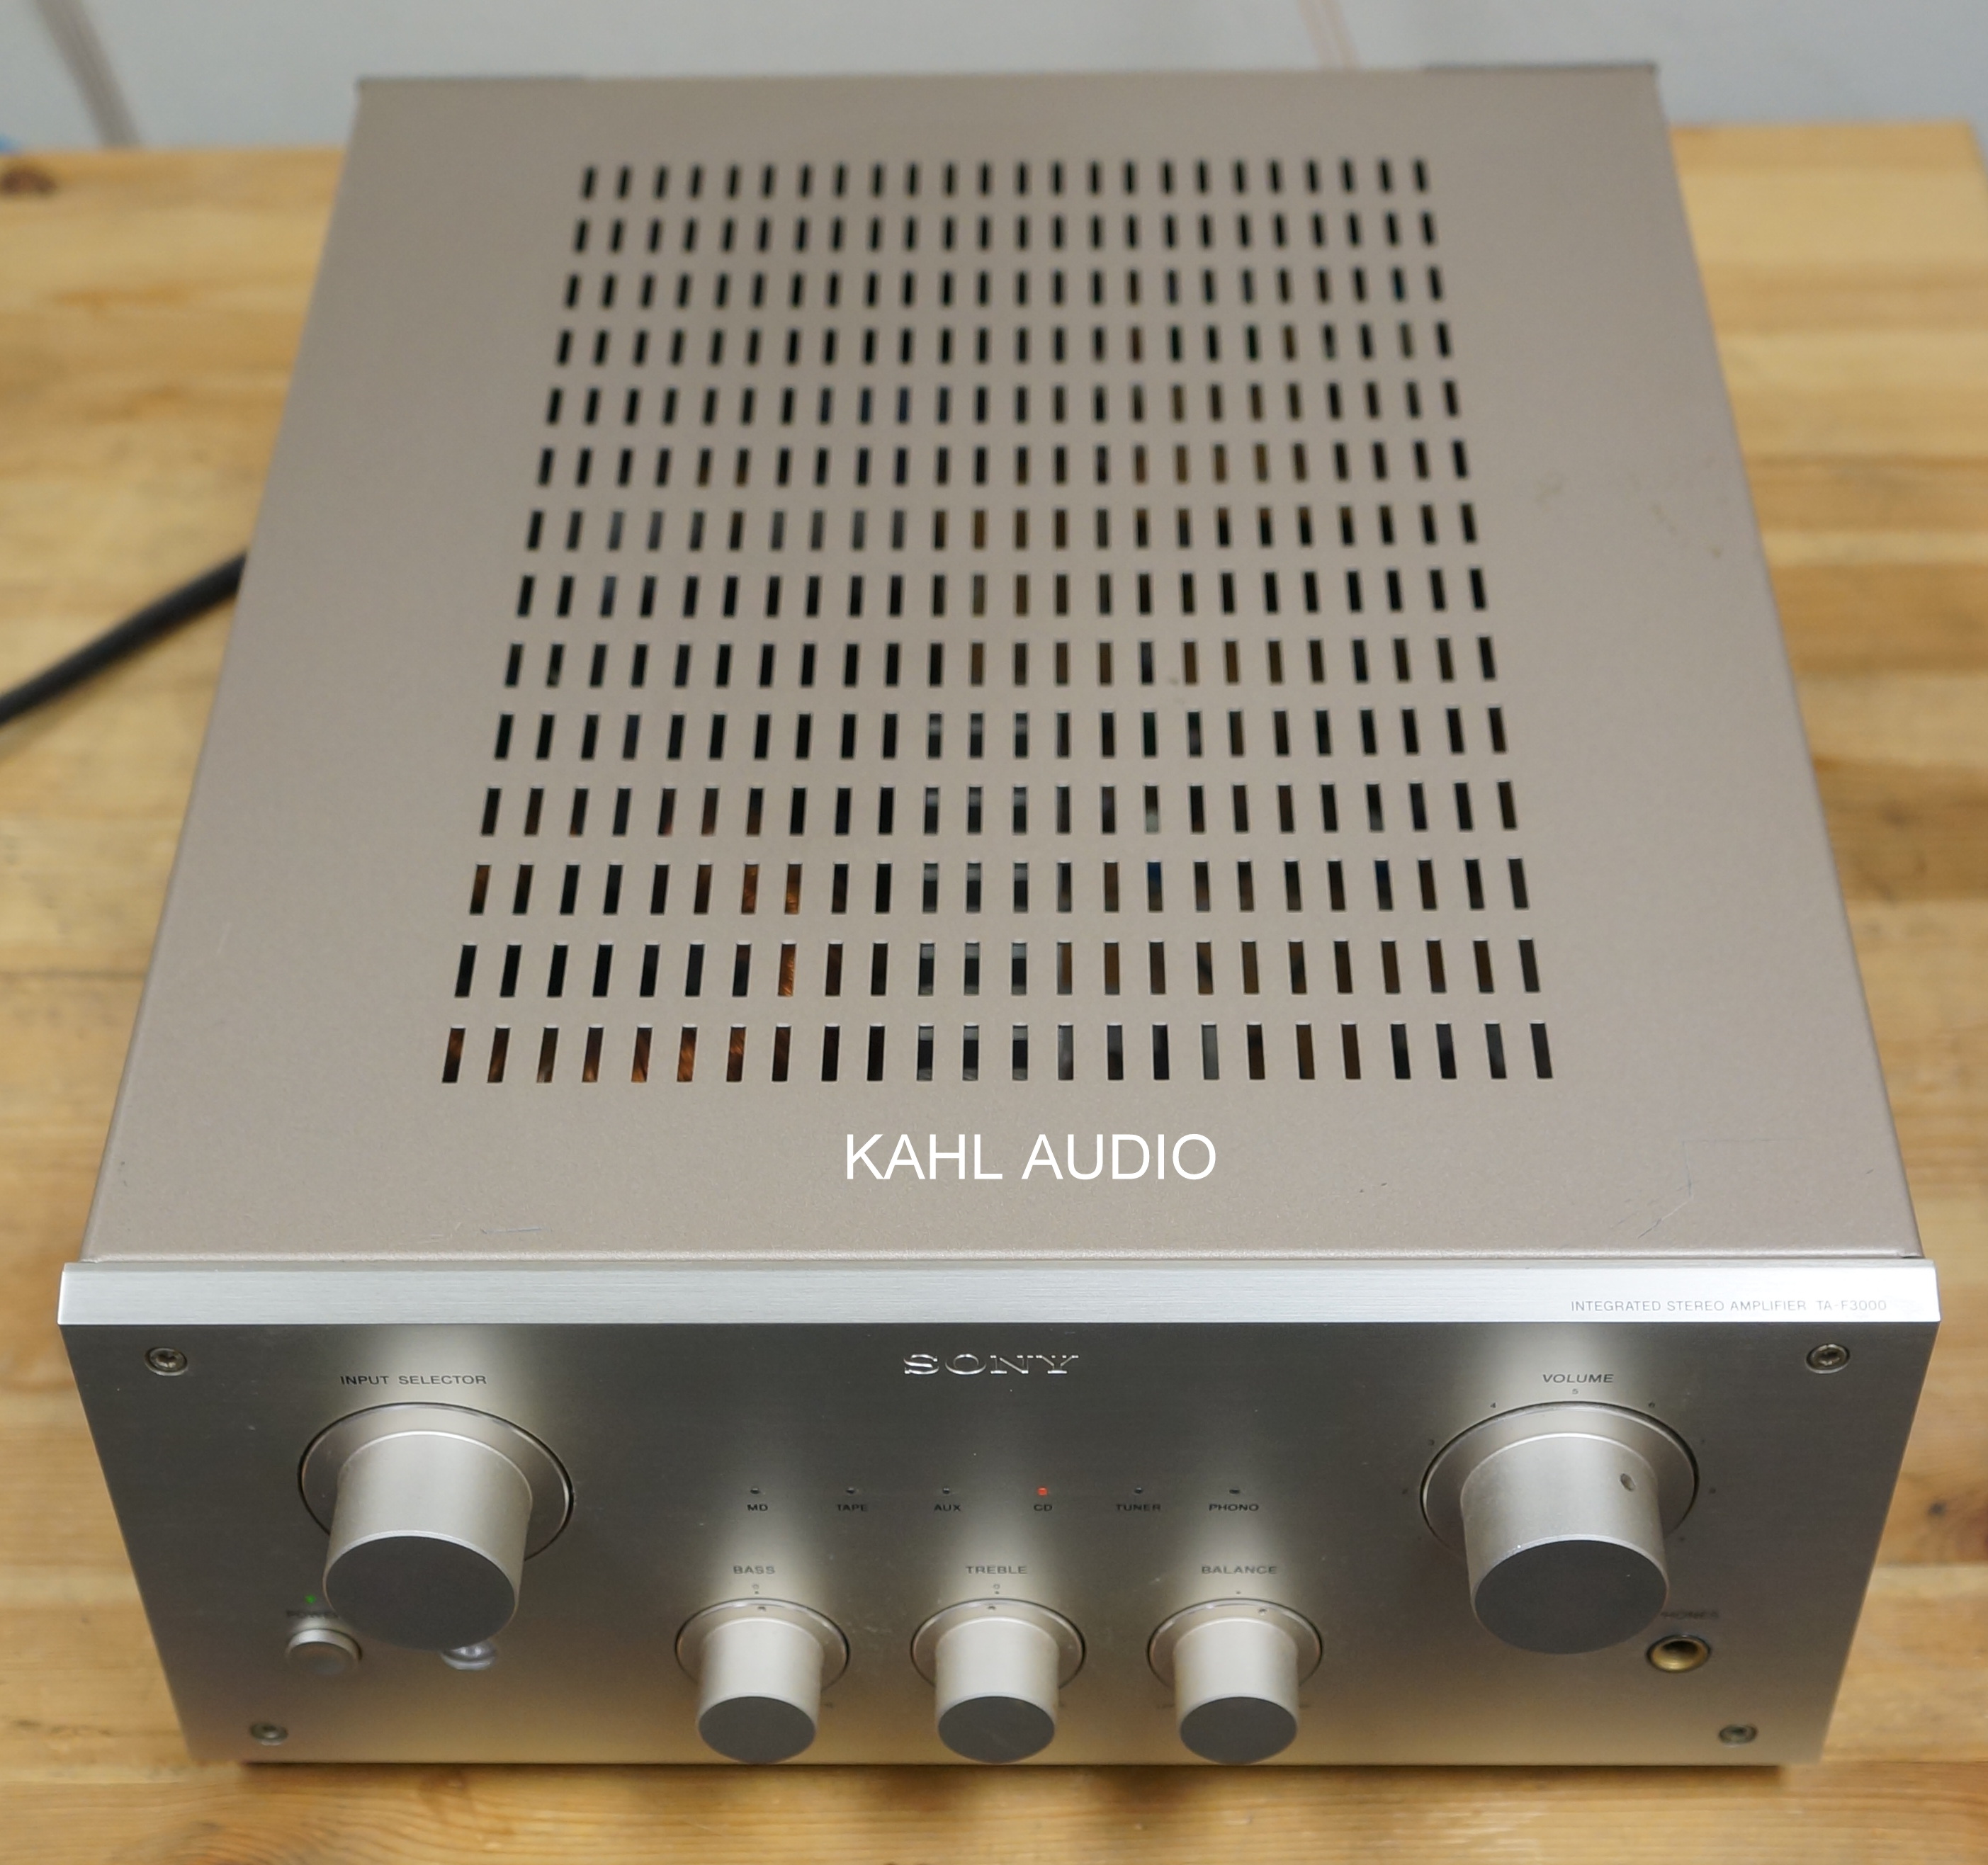 SONY TA-F3000 Integrated amp. JDM 100V special! RARE. $1,000 MSRP